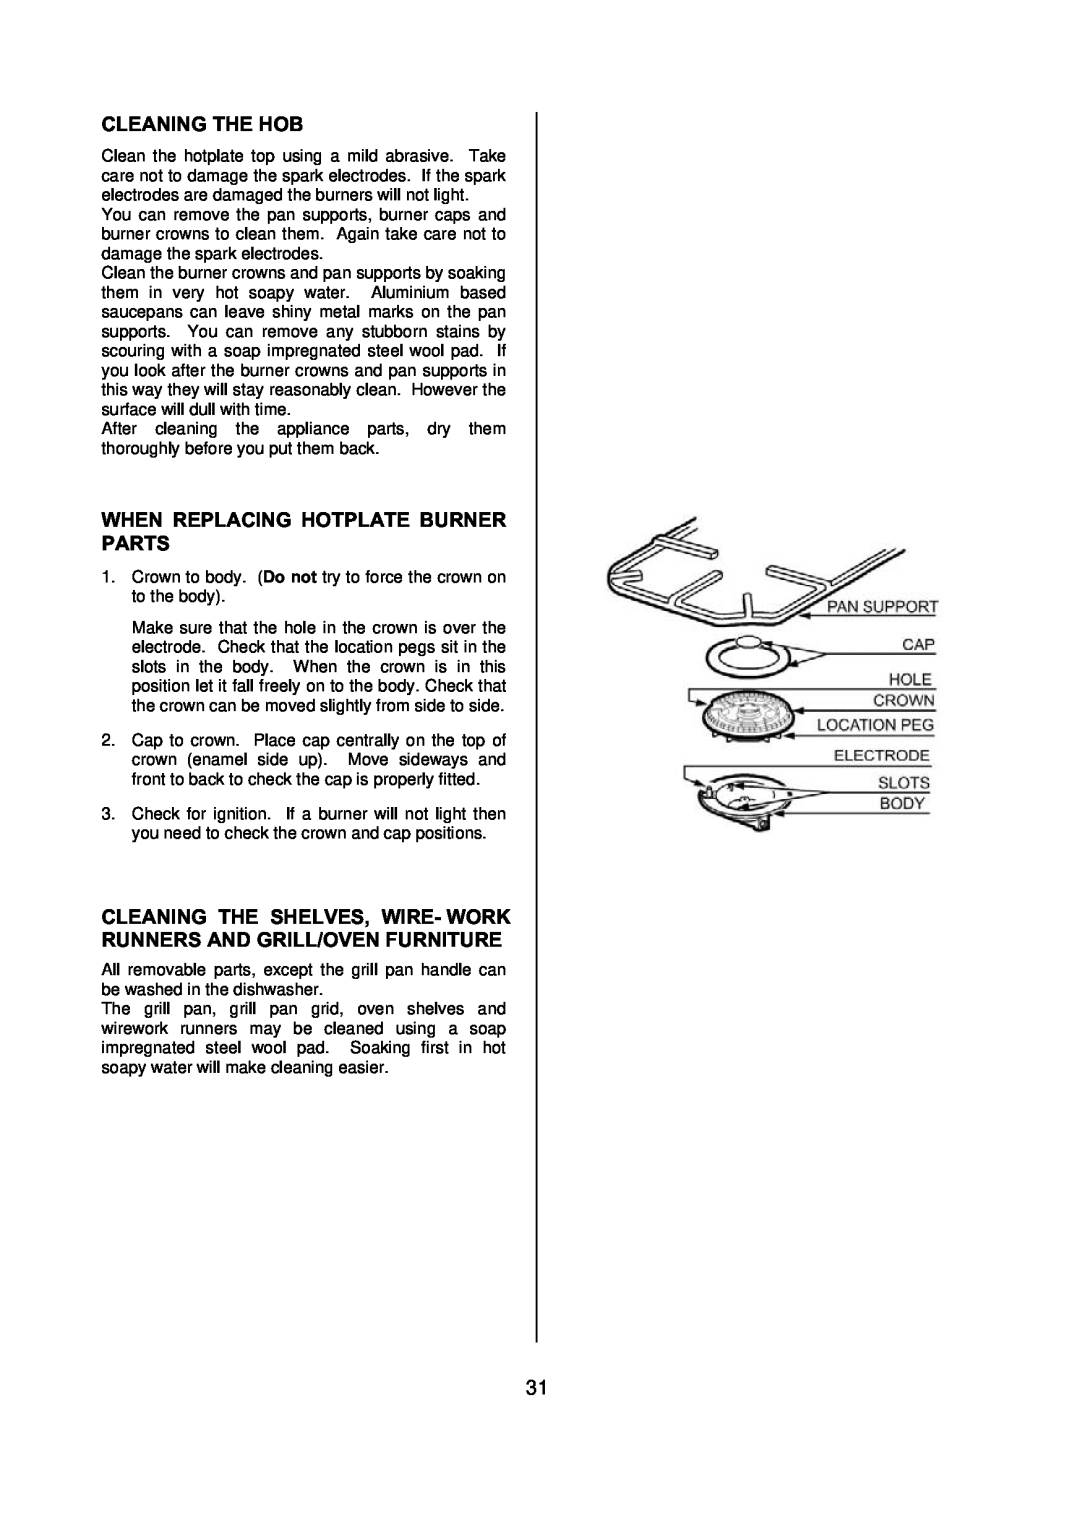 Electrolux D77000 user manual Cleaning The Hob, When Replacing Hotplate Burner Parts 